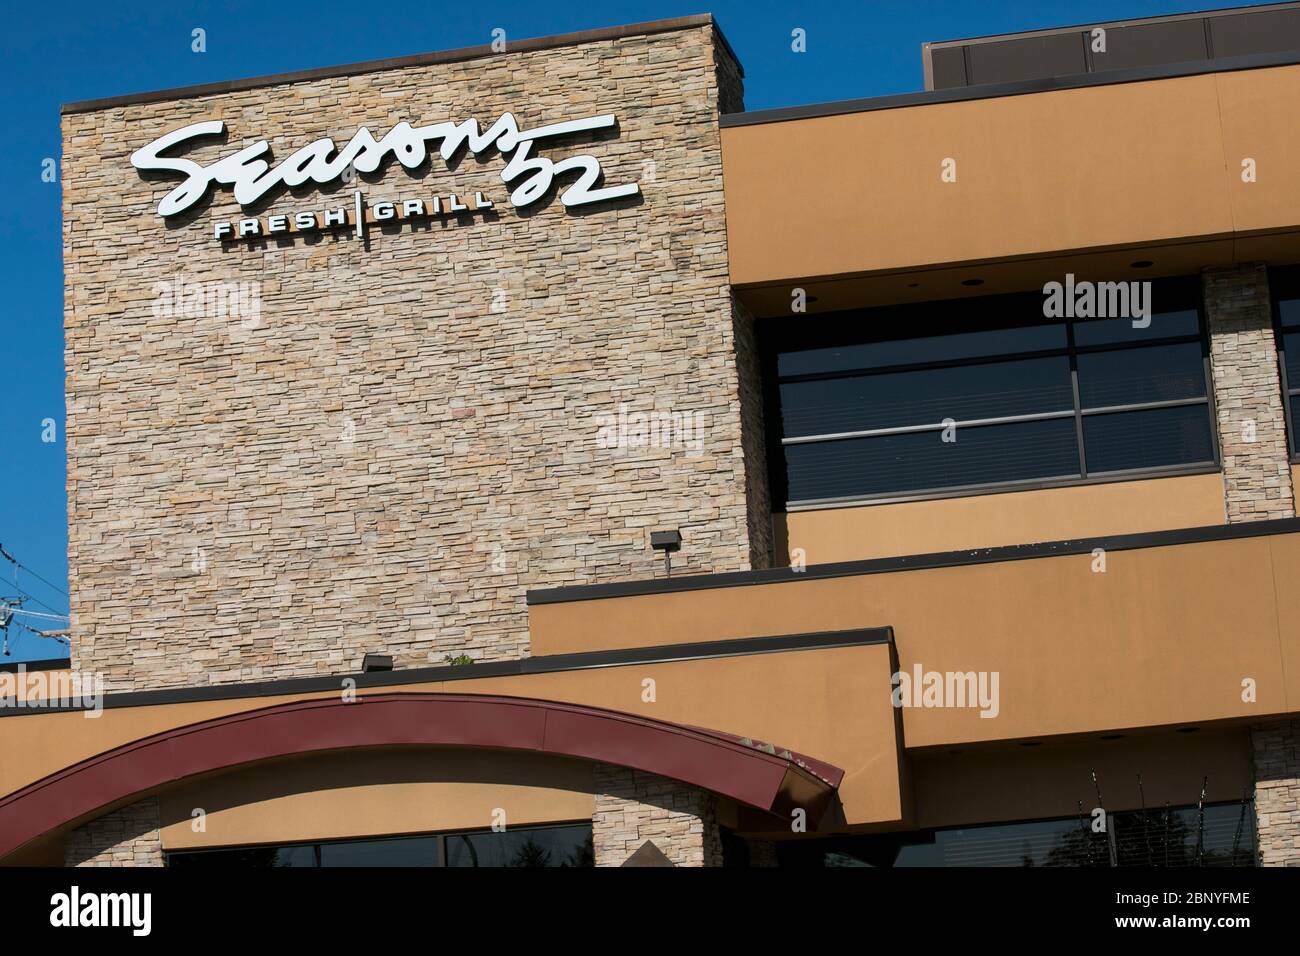 A logo sign outside of a Seasons 52 restaurant location in King of Prussia, Pennsylvania on May 4, 2020. Stock Photo